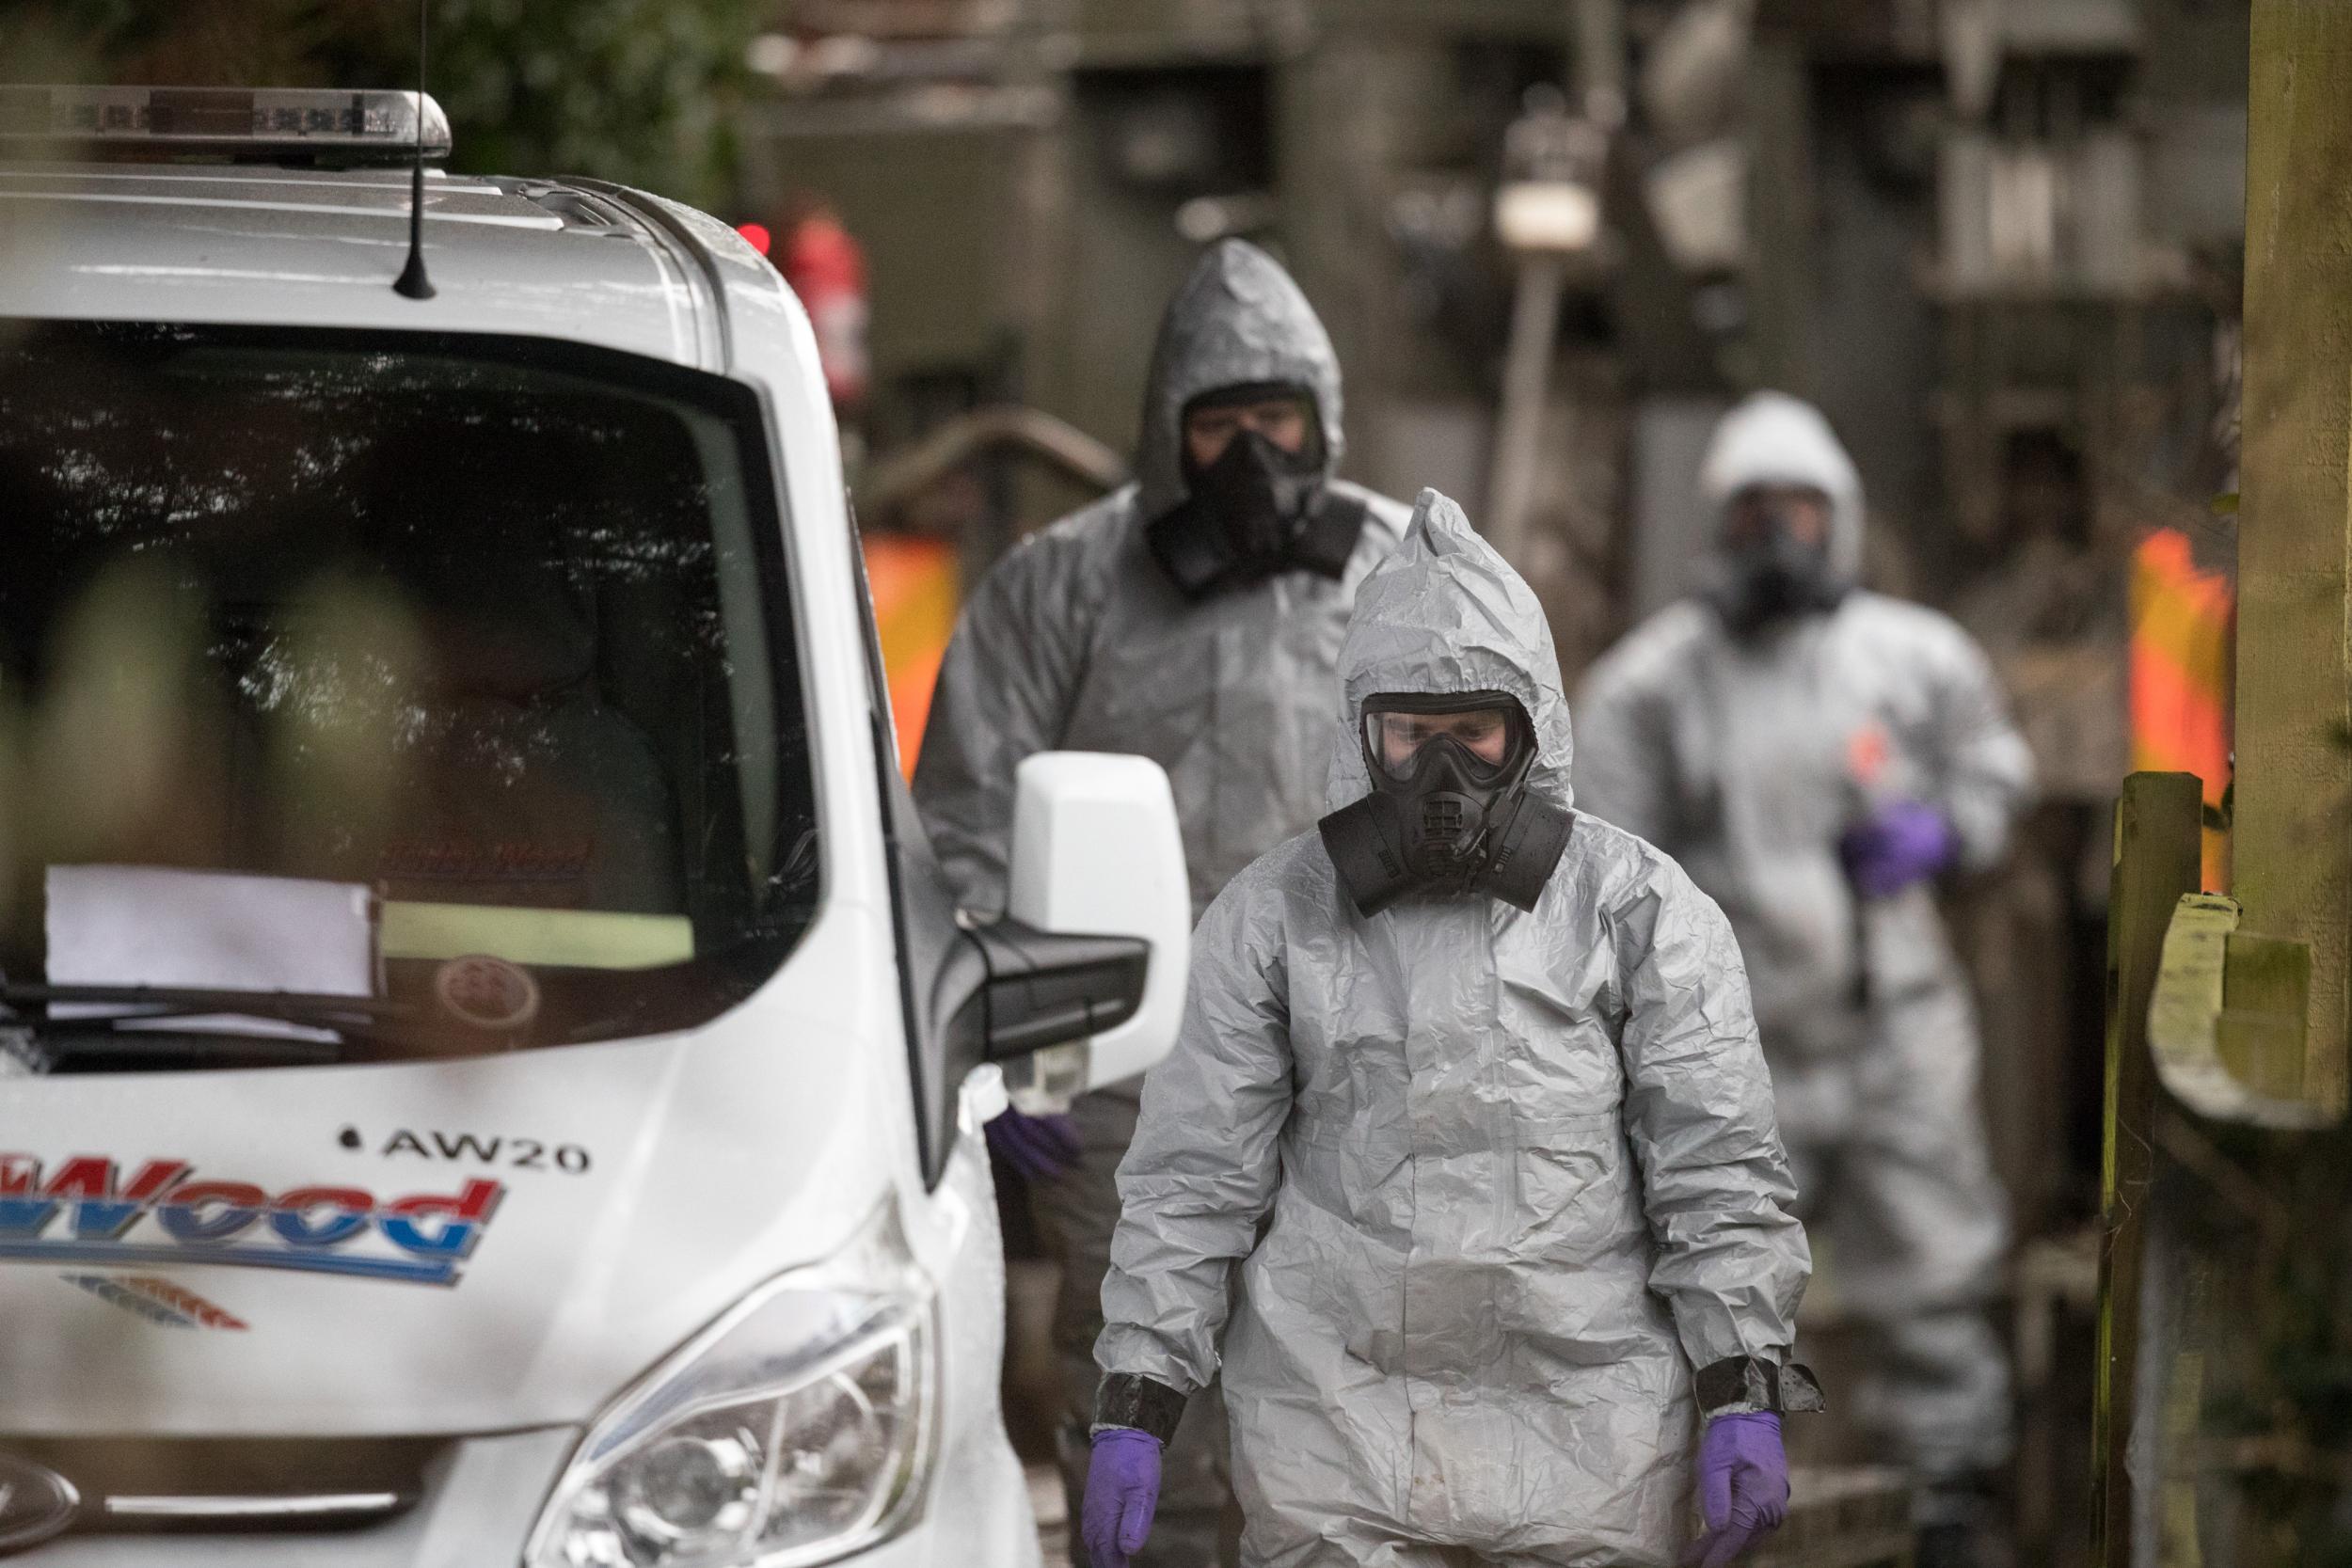 Salisbury Spy Attack Russian Official Suggests Nerve Agent Could Have Come From Uk Lab Porton